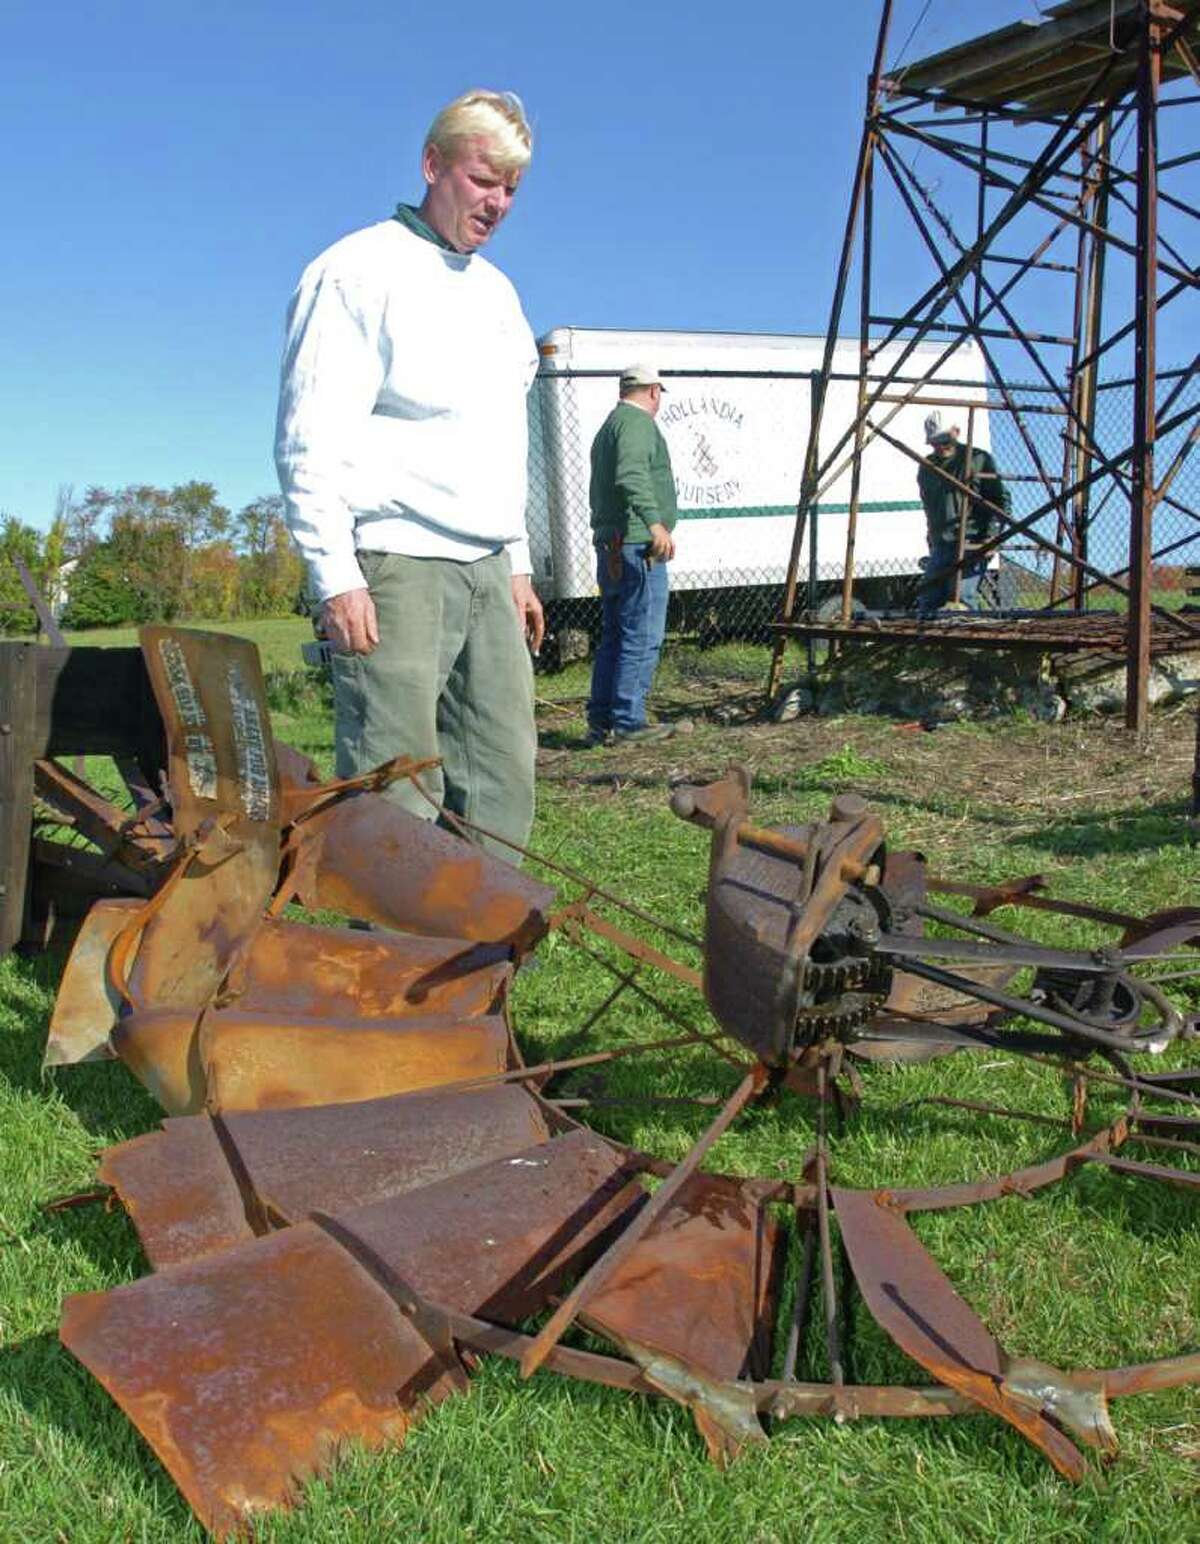 Eugene Reelick, of Hollandia Nursery in Bethel, disassembles a windmill at Happy Landings open space in Brookfield, Oct. 19, 2010. The windmills are considered a local landmark, but they were falling into disrepair. They will soon be repainted and placed back.